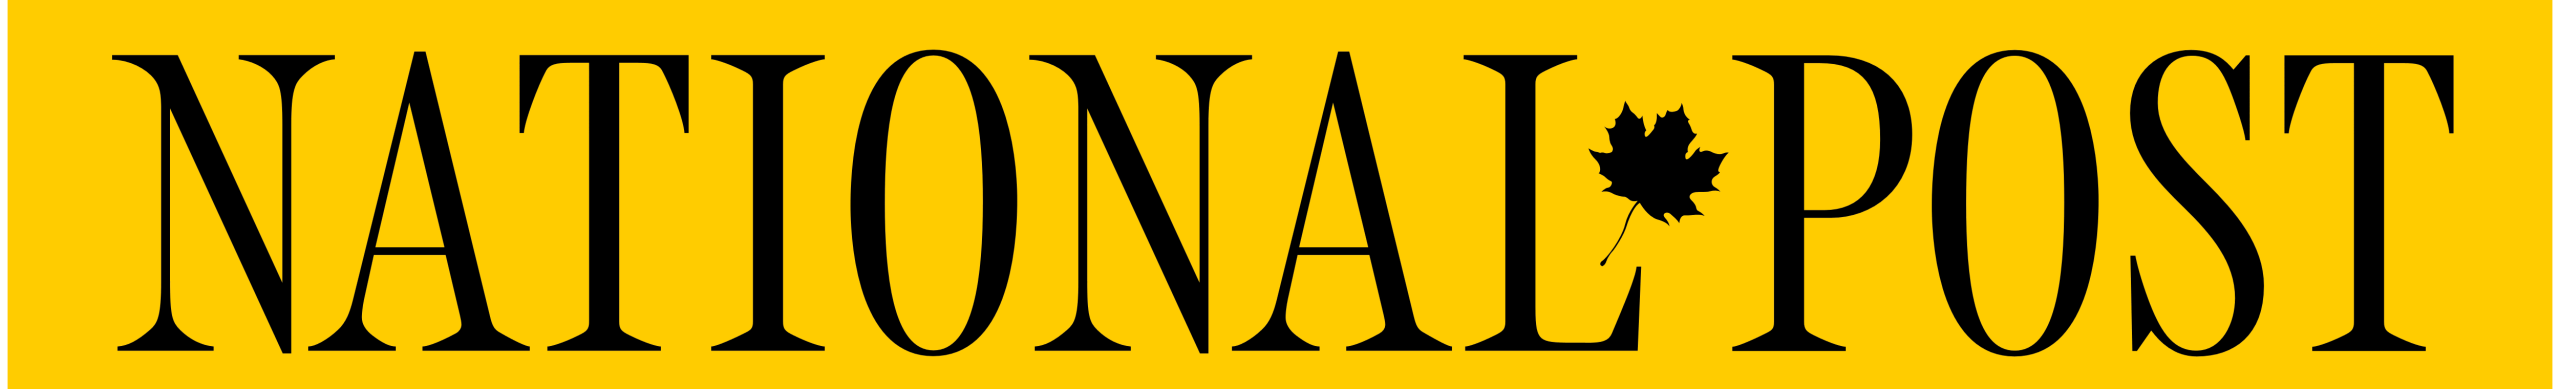 national post logo in yellow